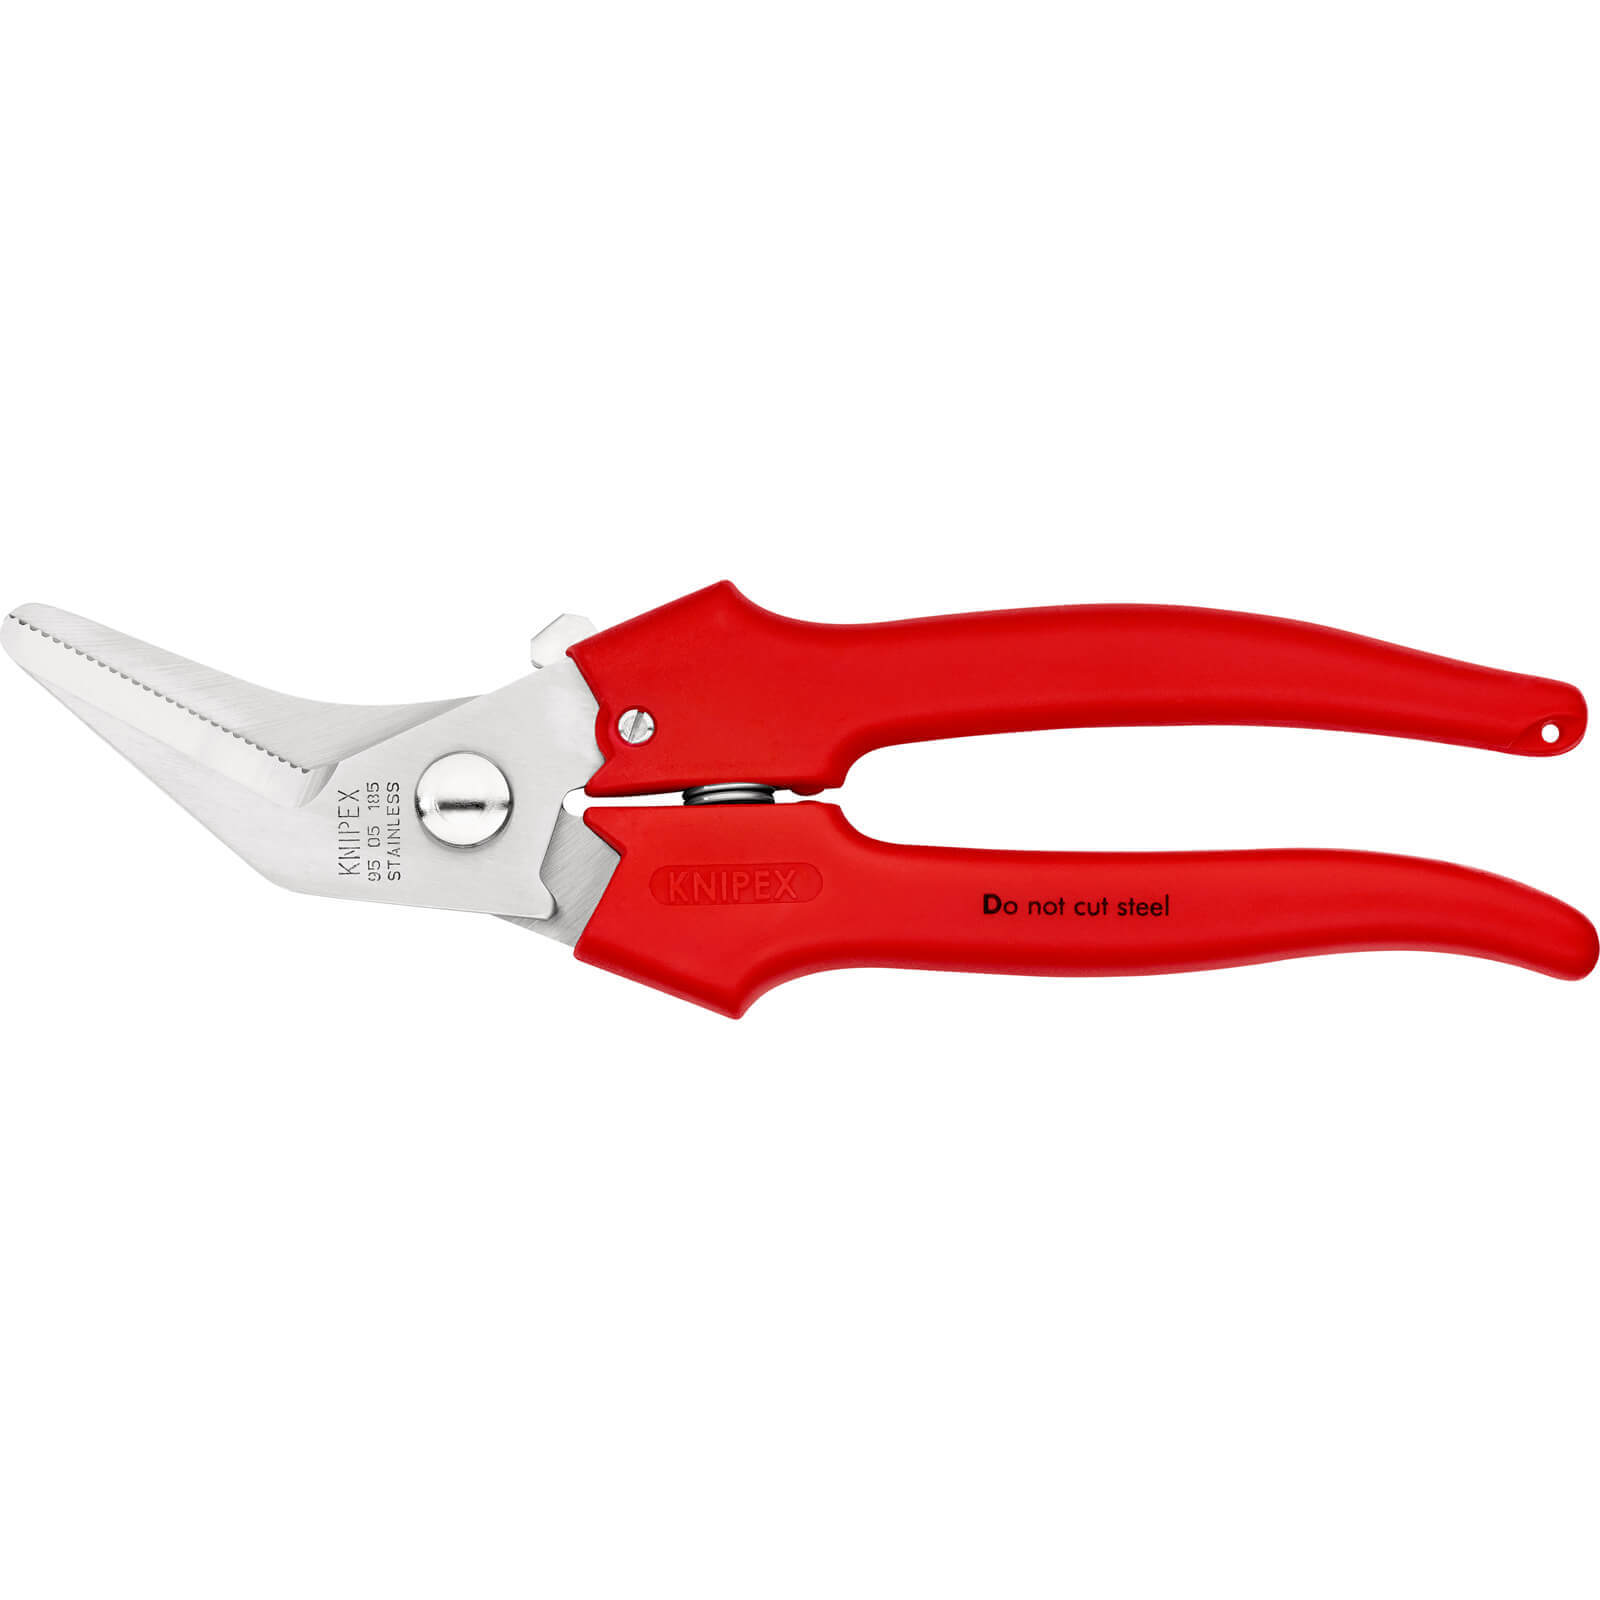 Knipex 95 05 Offset Combination Shears 185mm